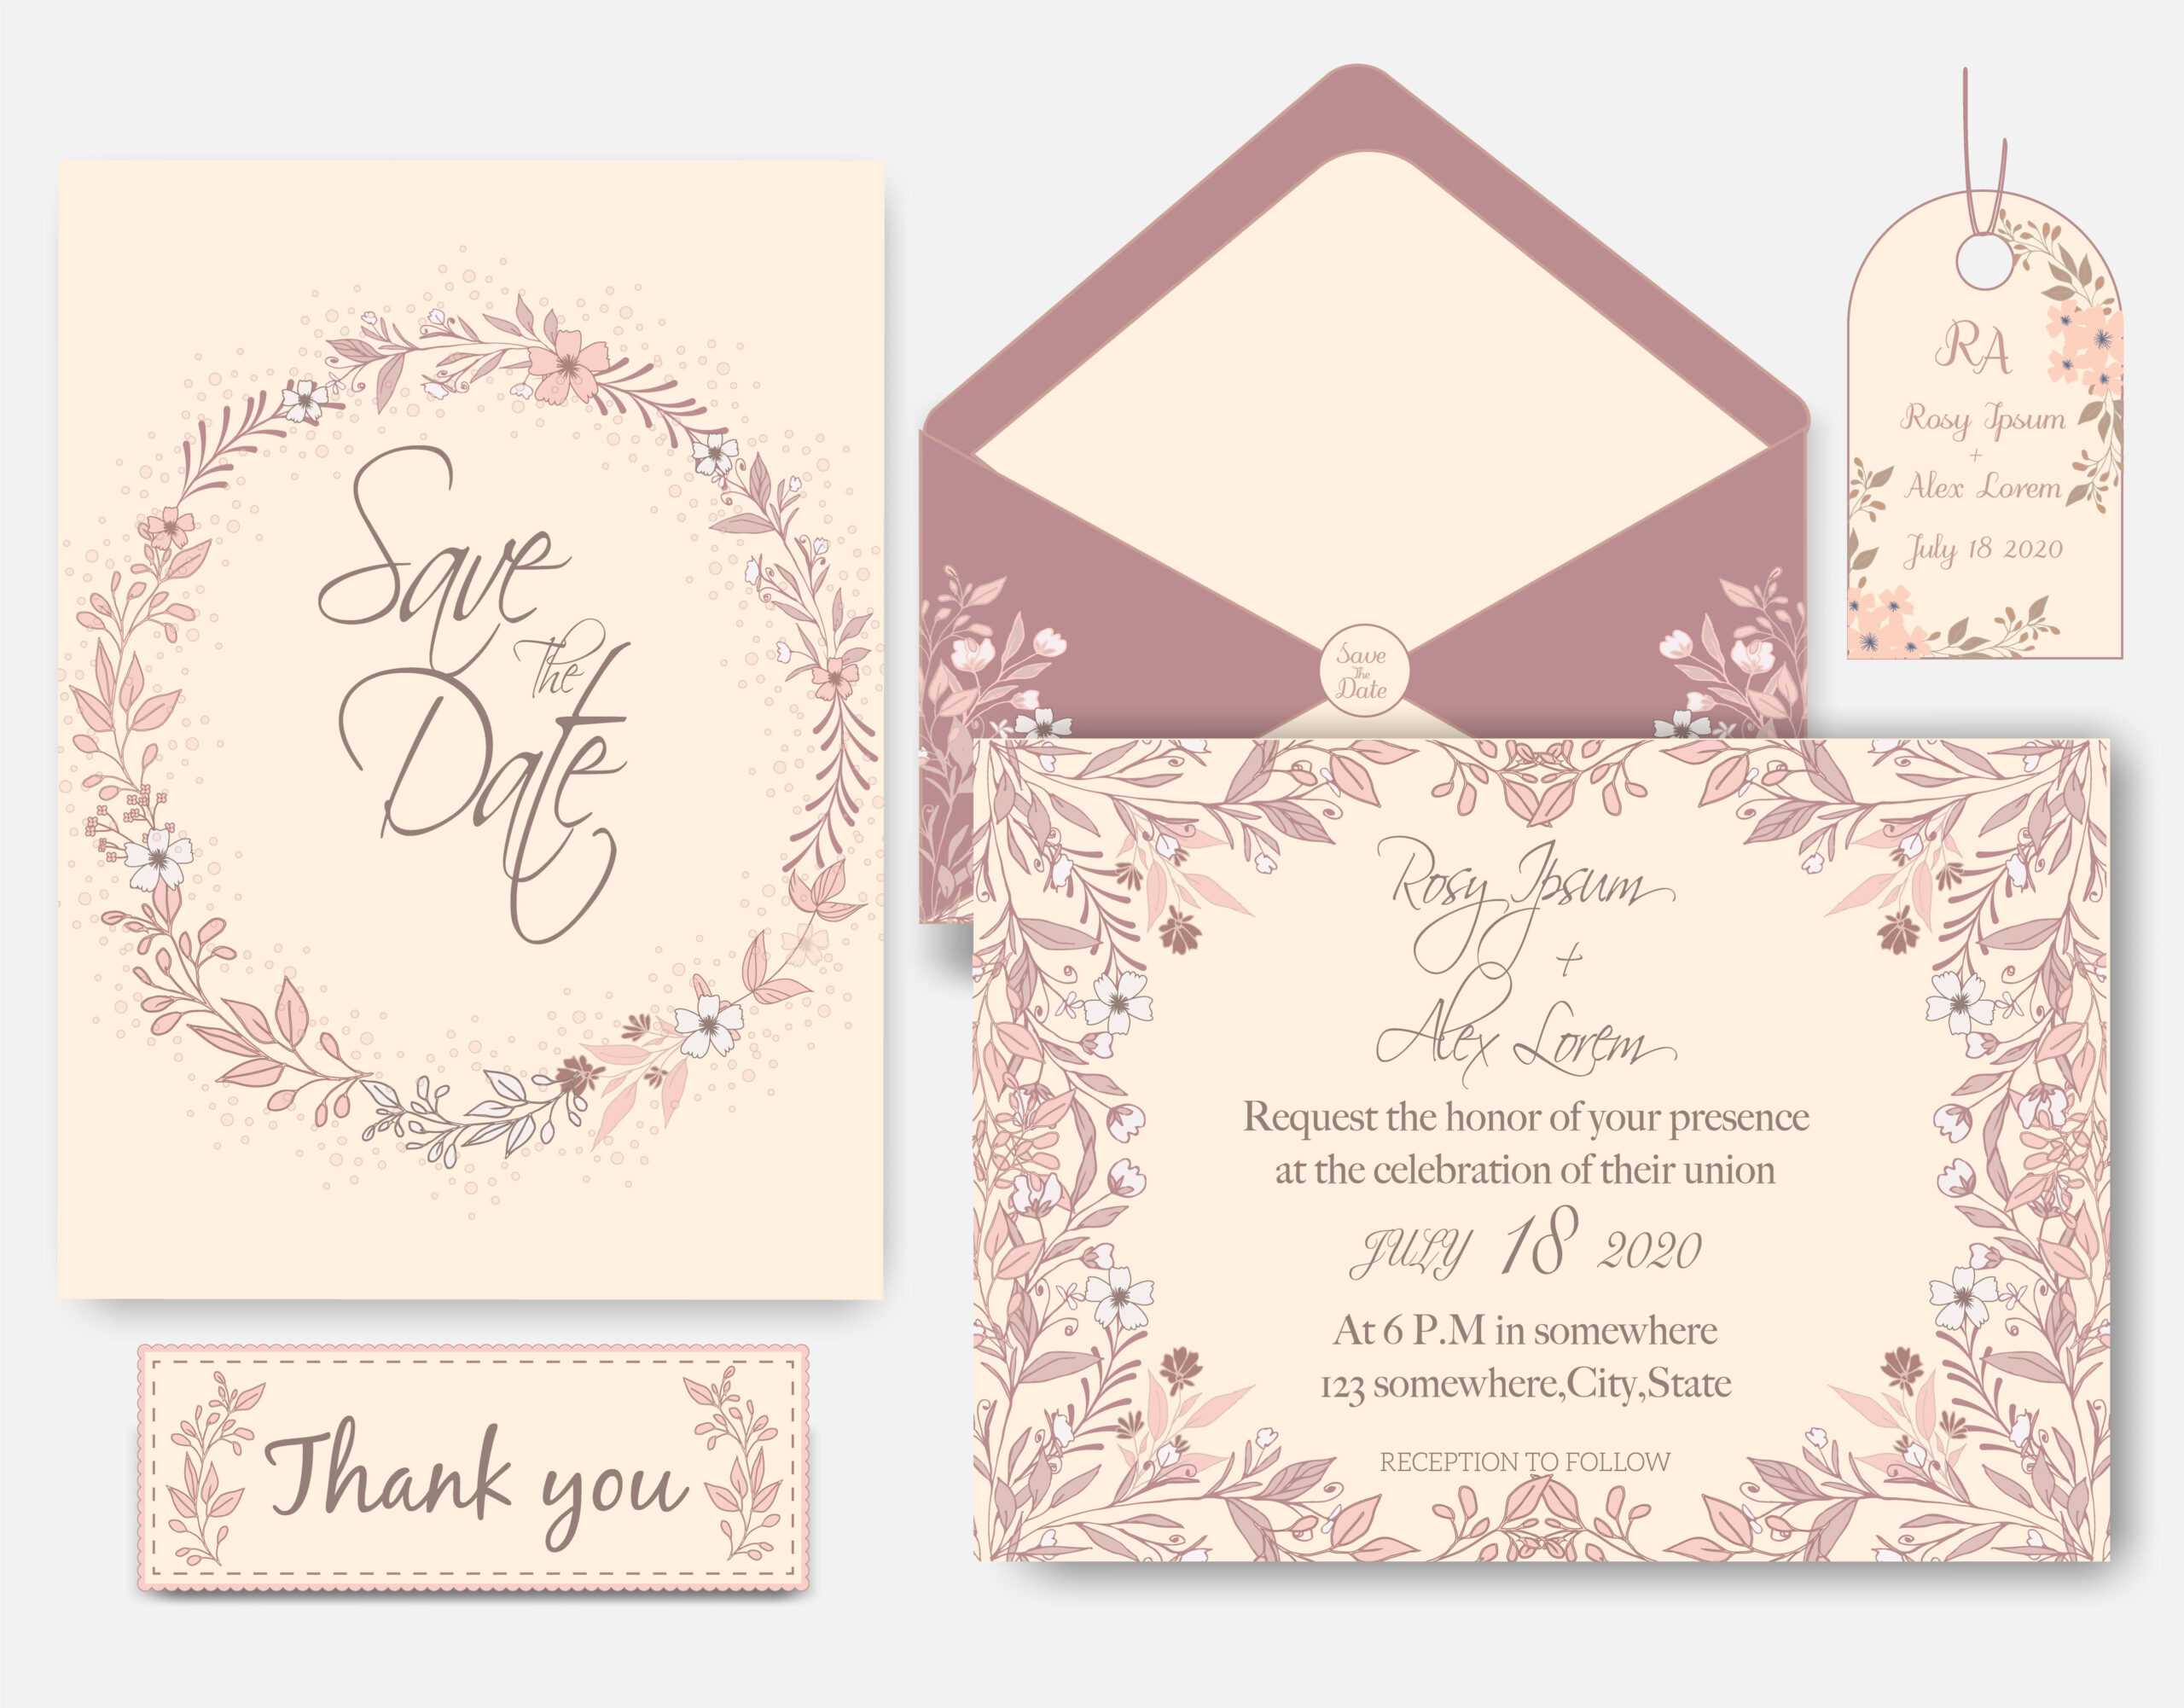 Wedding Invitation Card With Flower Templates - Download For Celebrate It Templates Place Cards